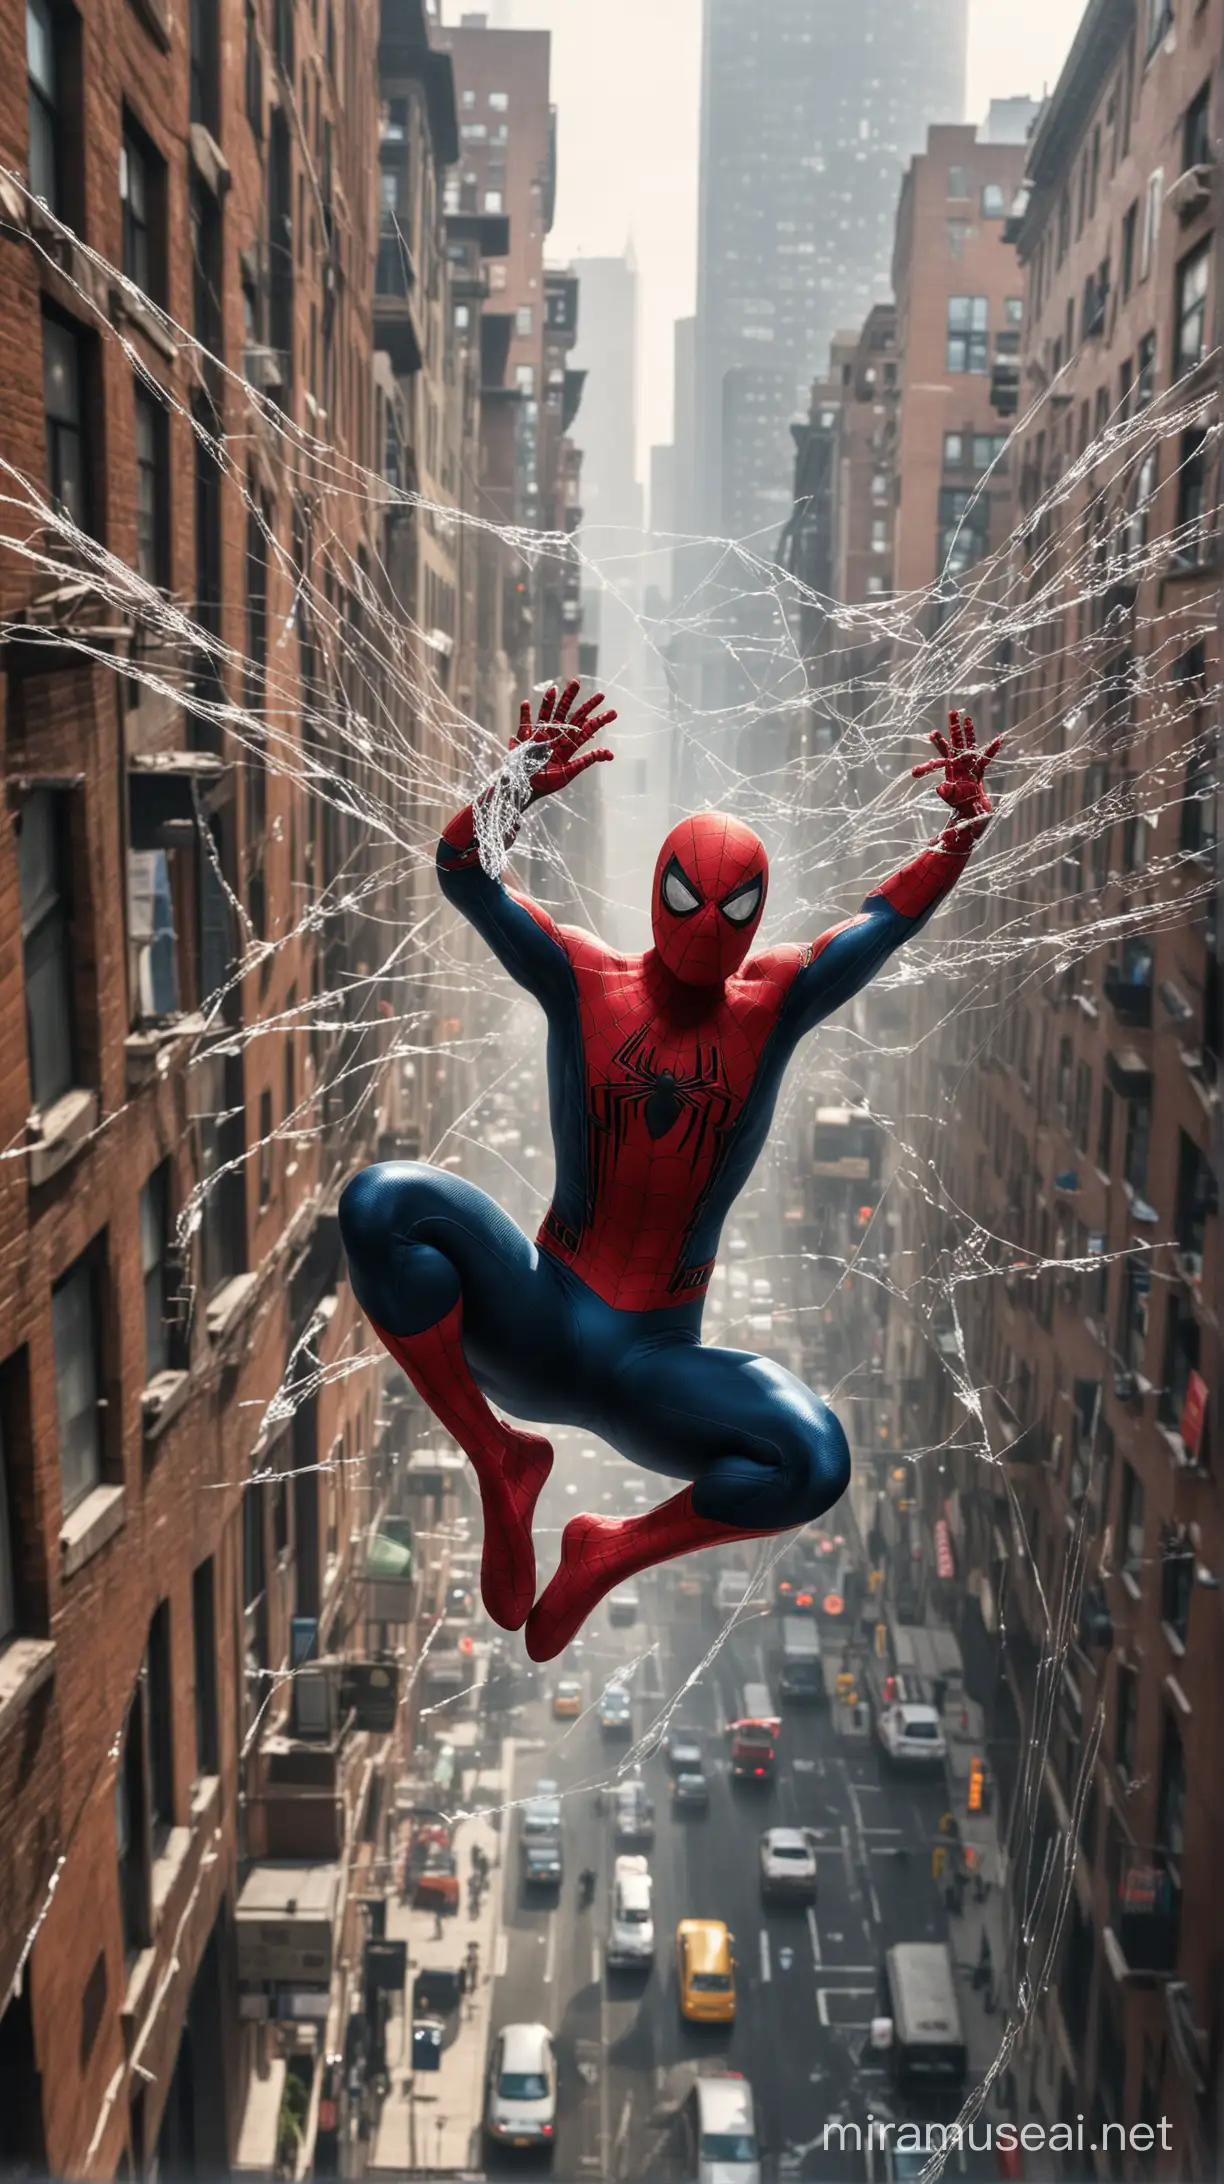 Spiderman Soaring Above Urban Streets with Spider Web